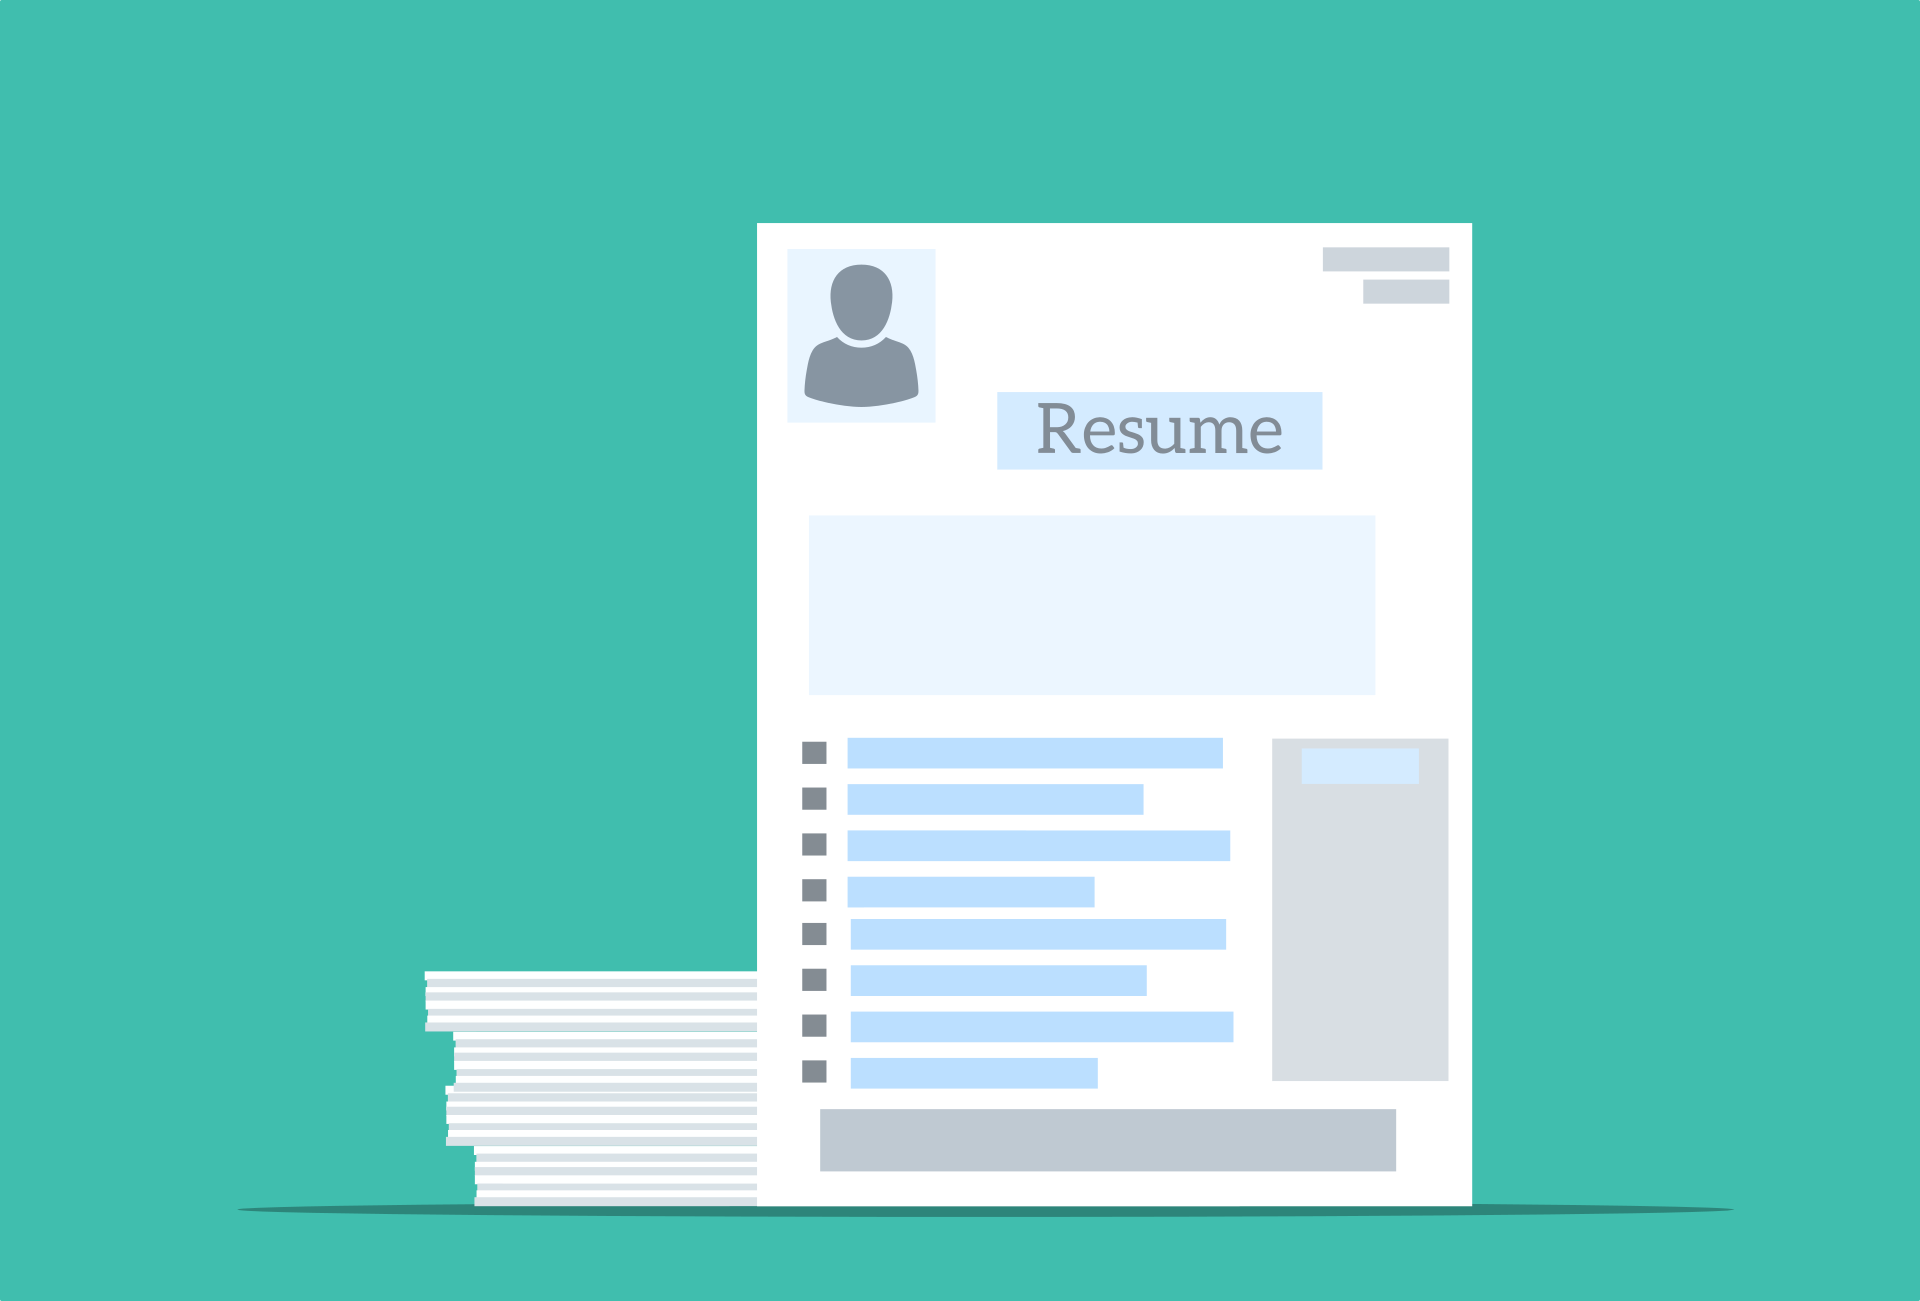 Tailor your resume and cover letter